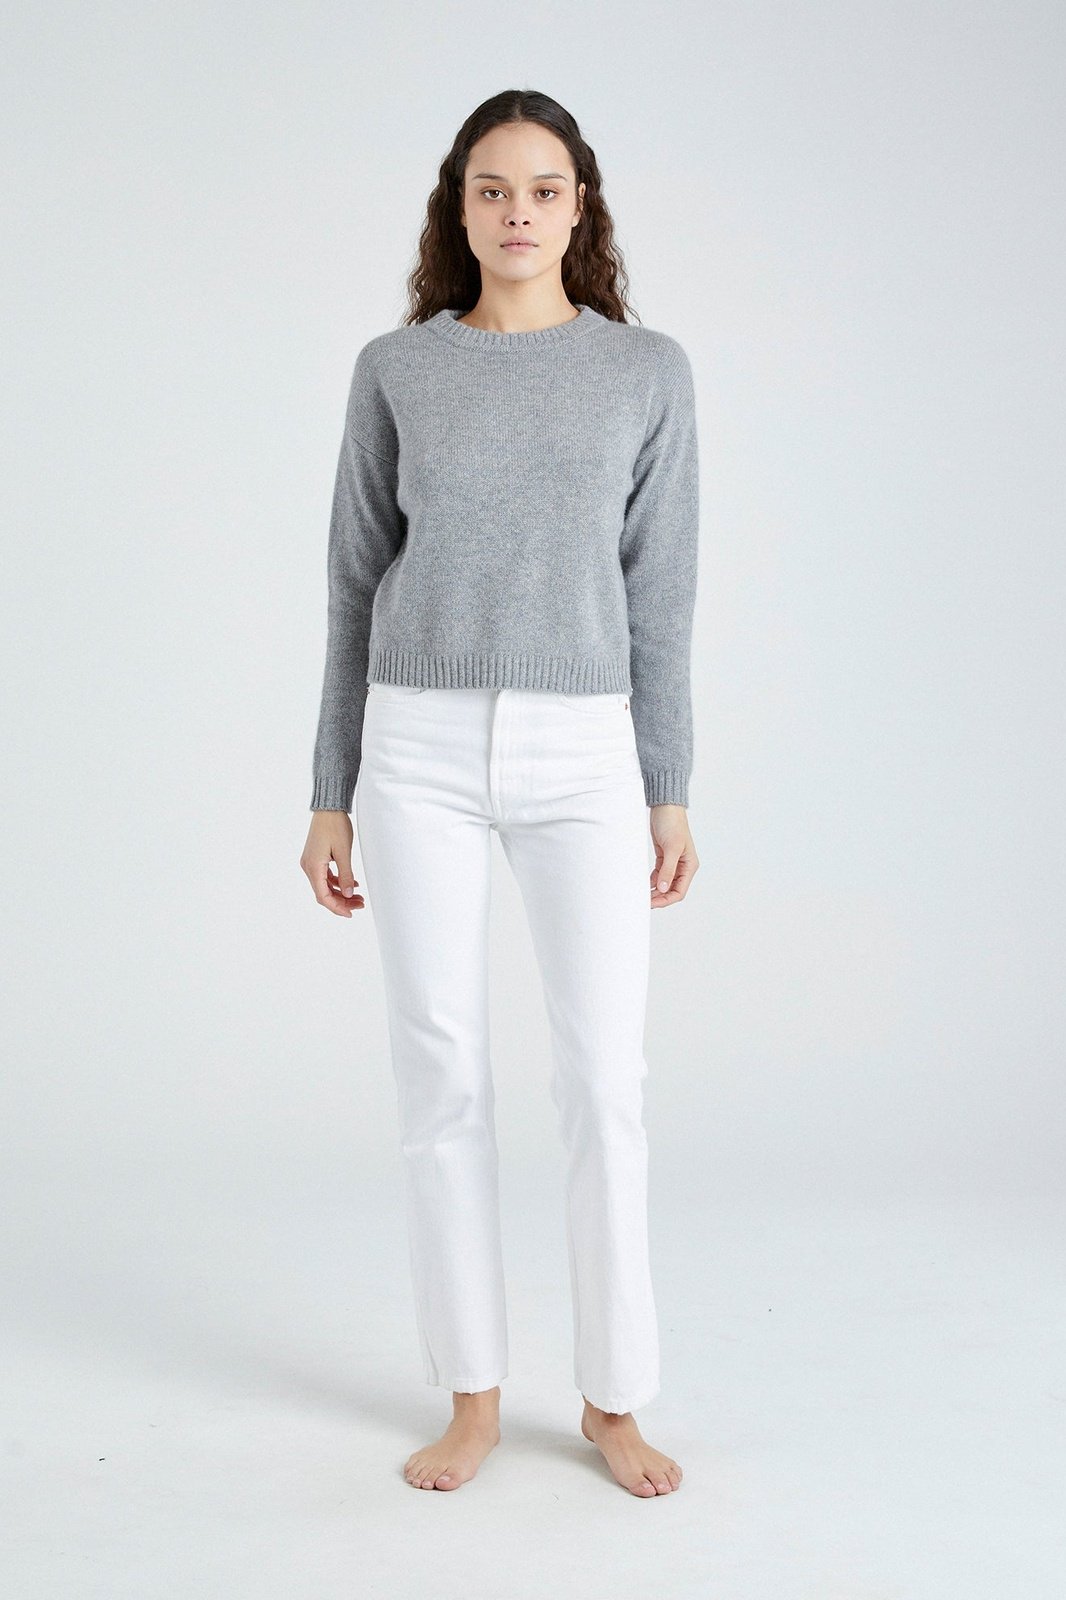 +Beryll Cashmere Sweater Holly | Pebble Gray - +Beryll Holly Cashmere Sweater | Shell Gray - +Beryll Worn By Good People